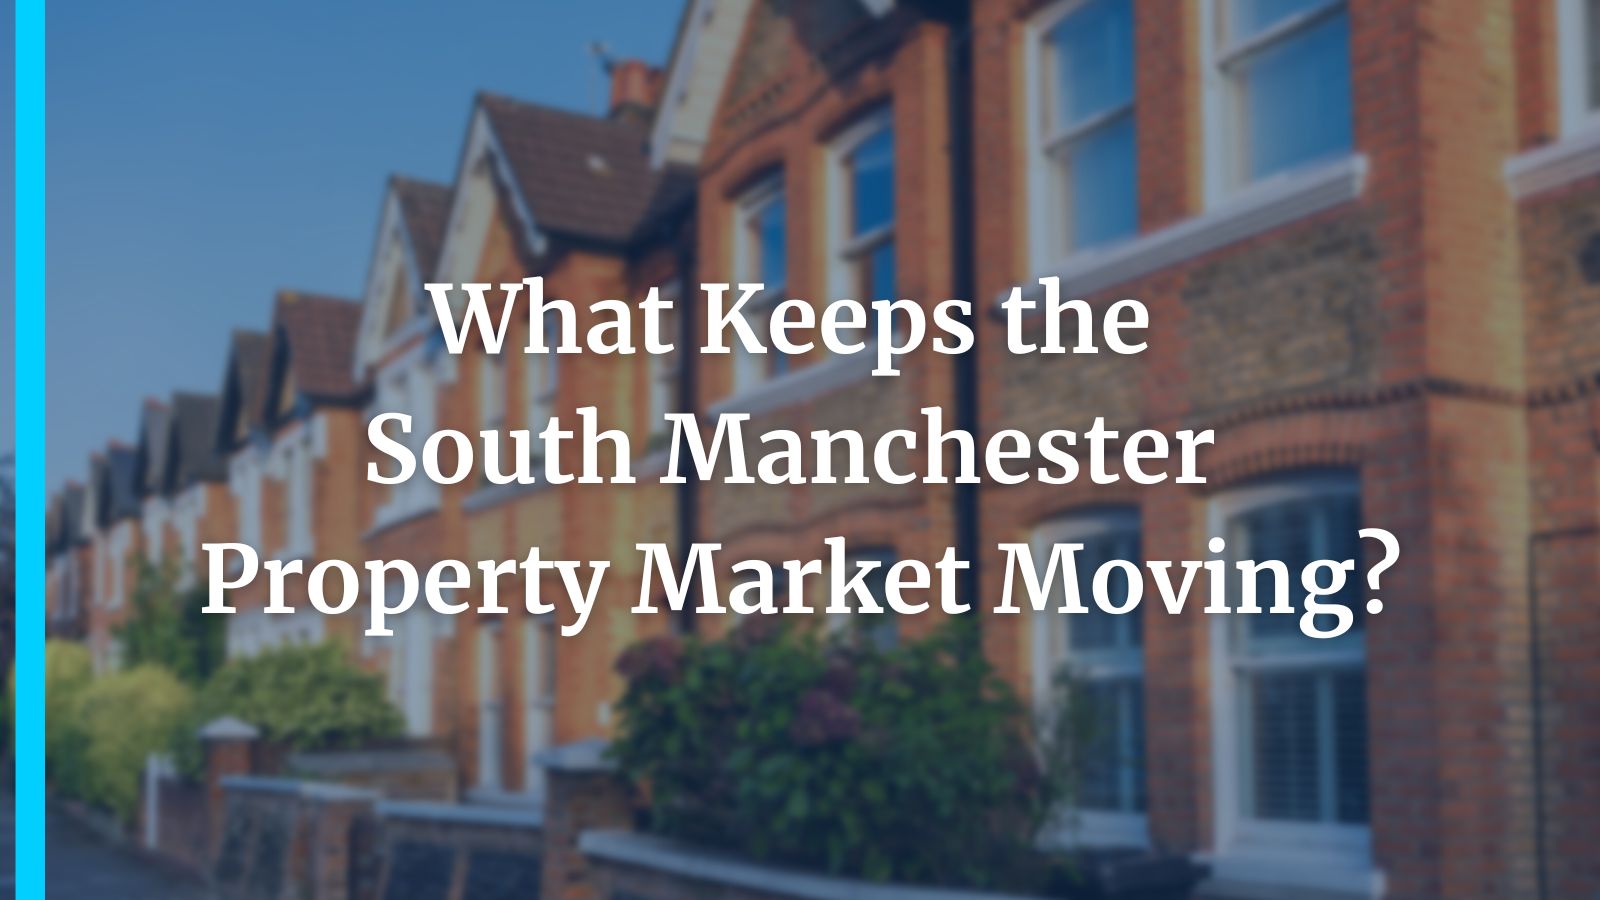 What Keeps the South Manchester Property Market Moving?